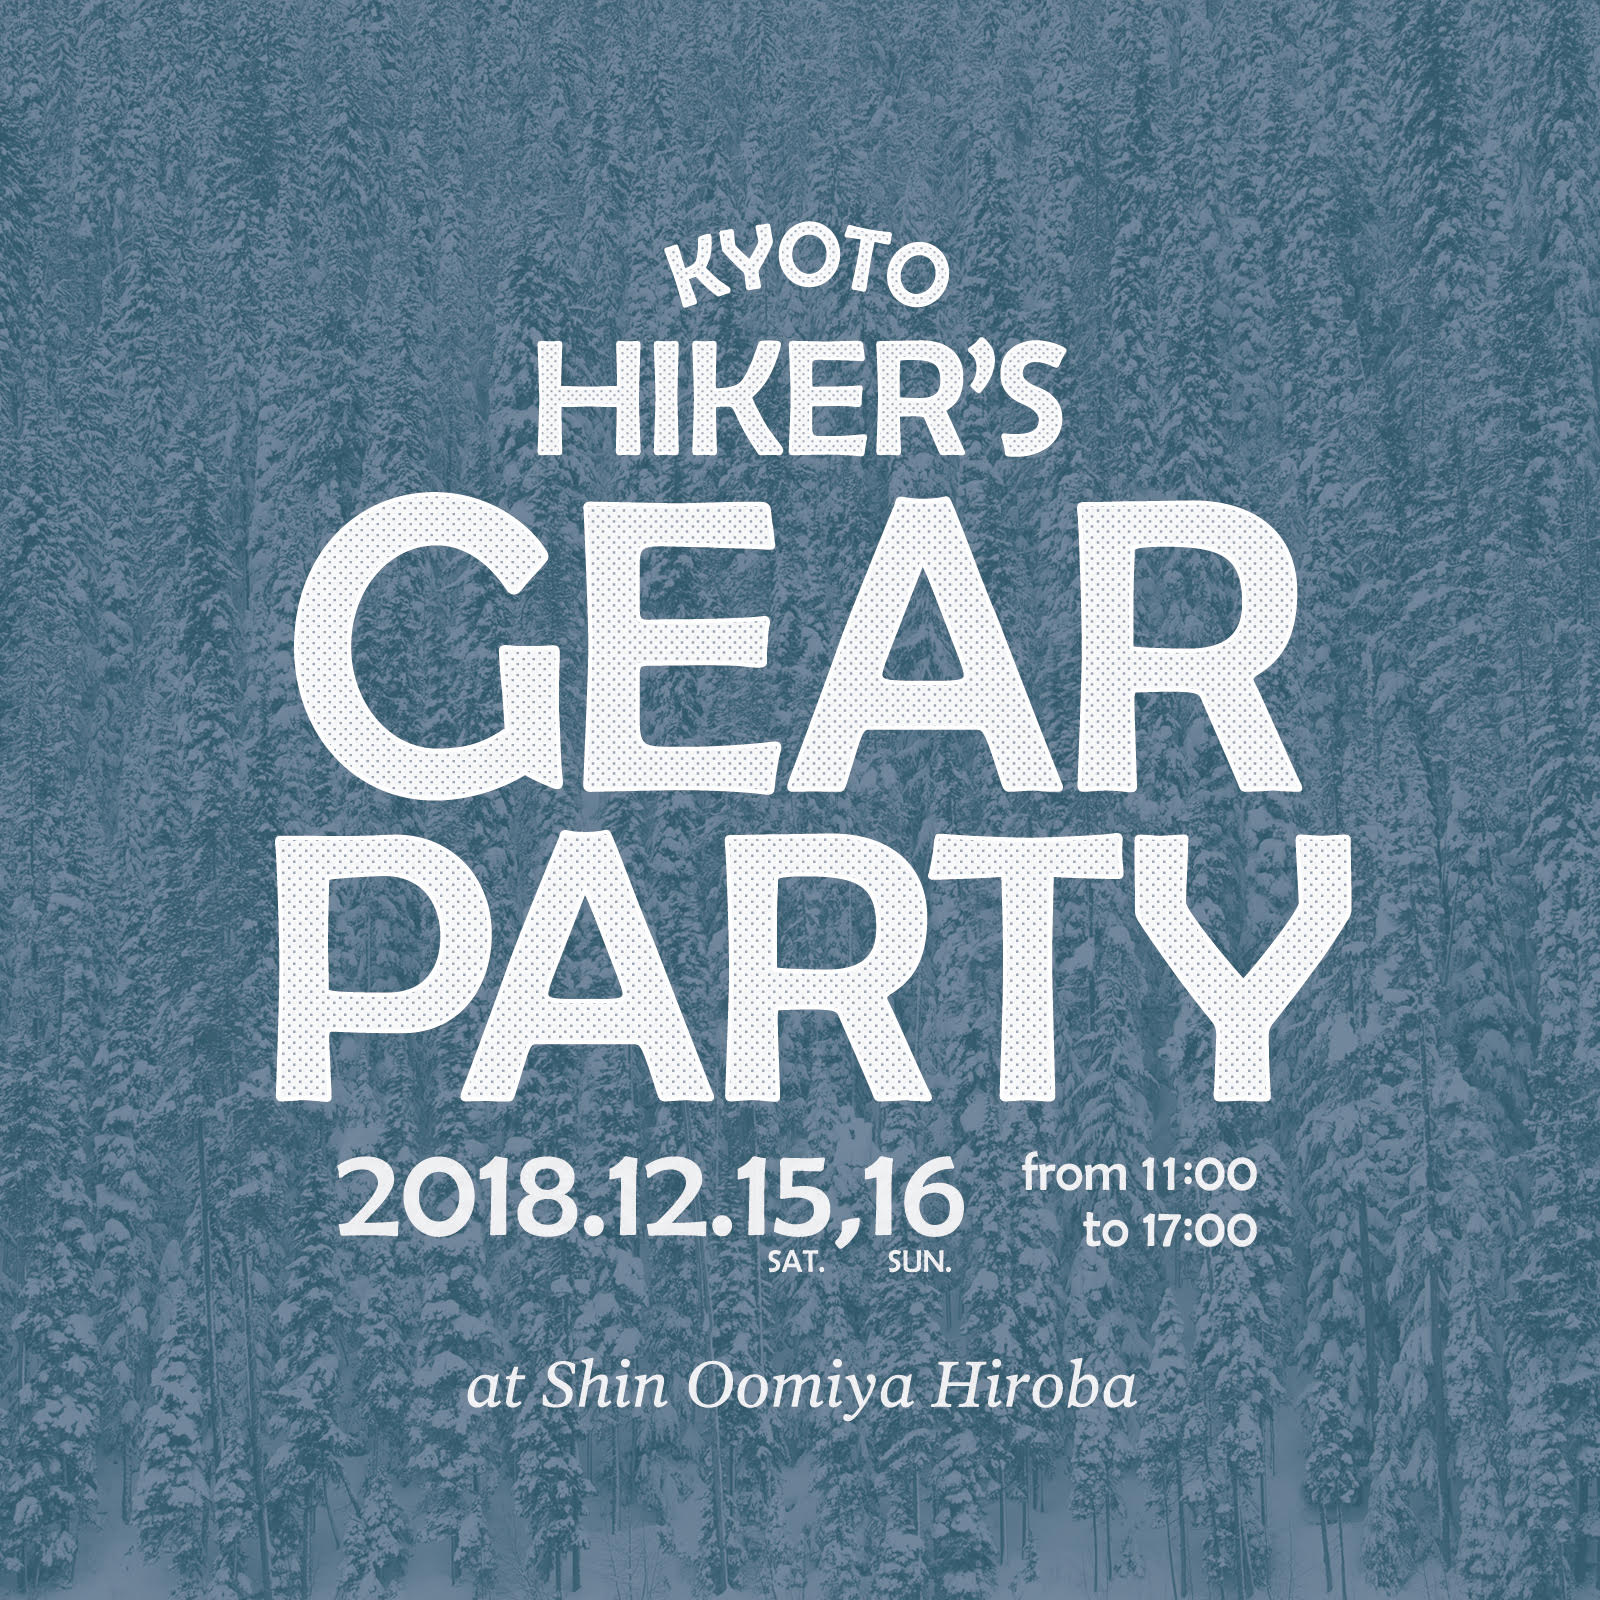 KYOTO HIKER'S GEAR PARTY出展